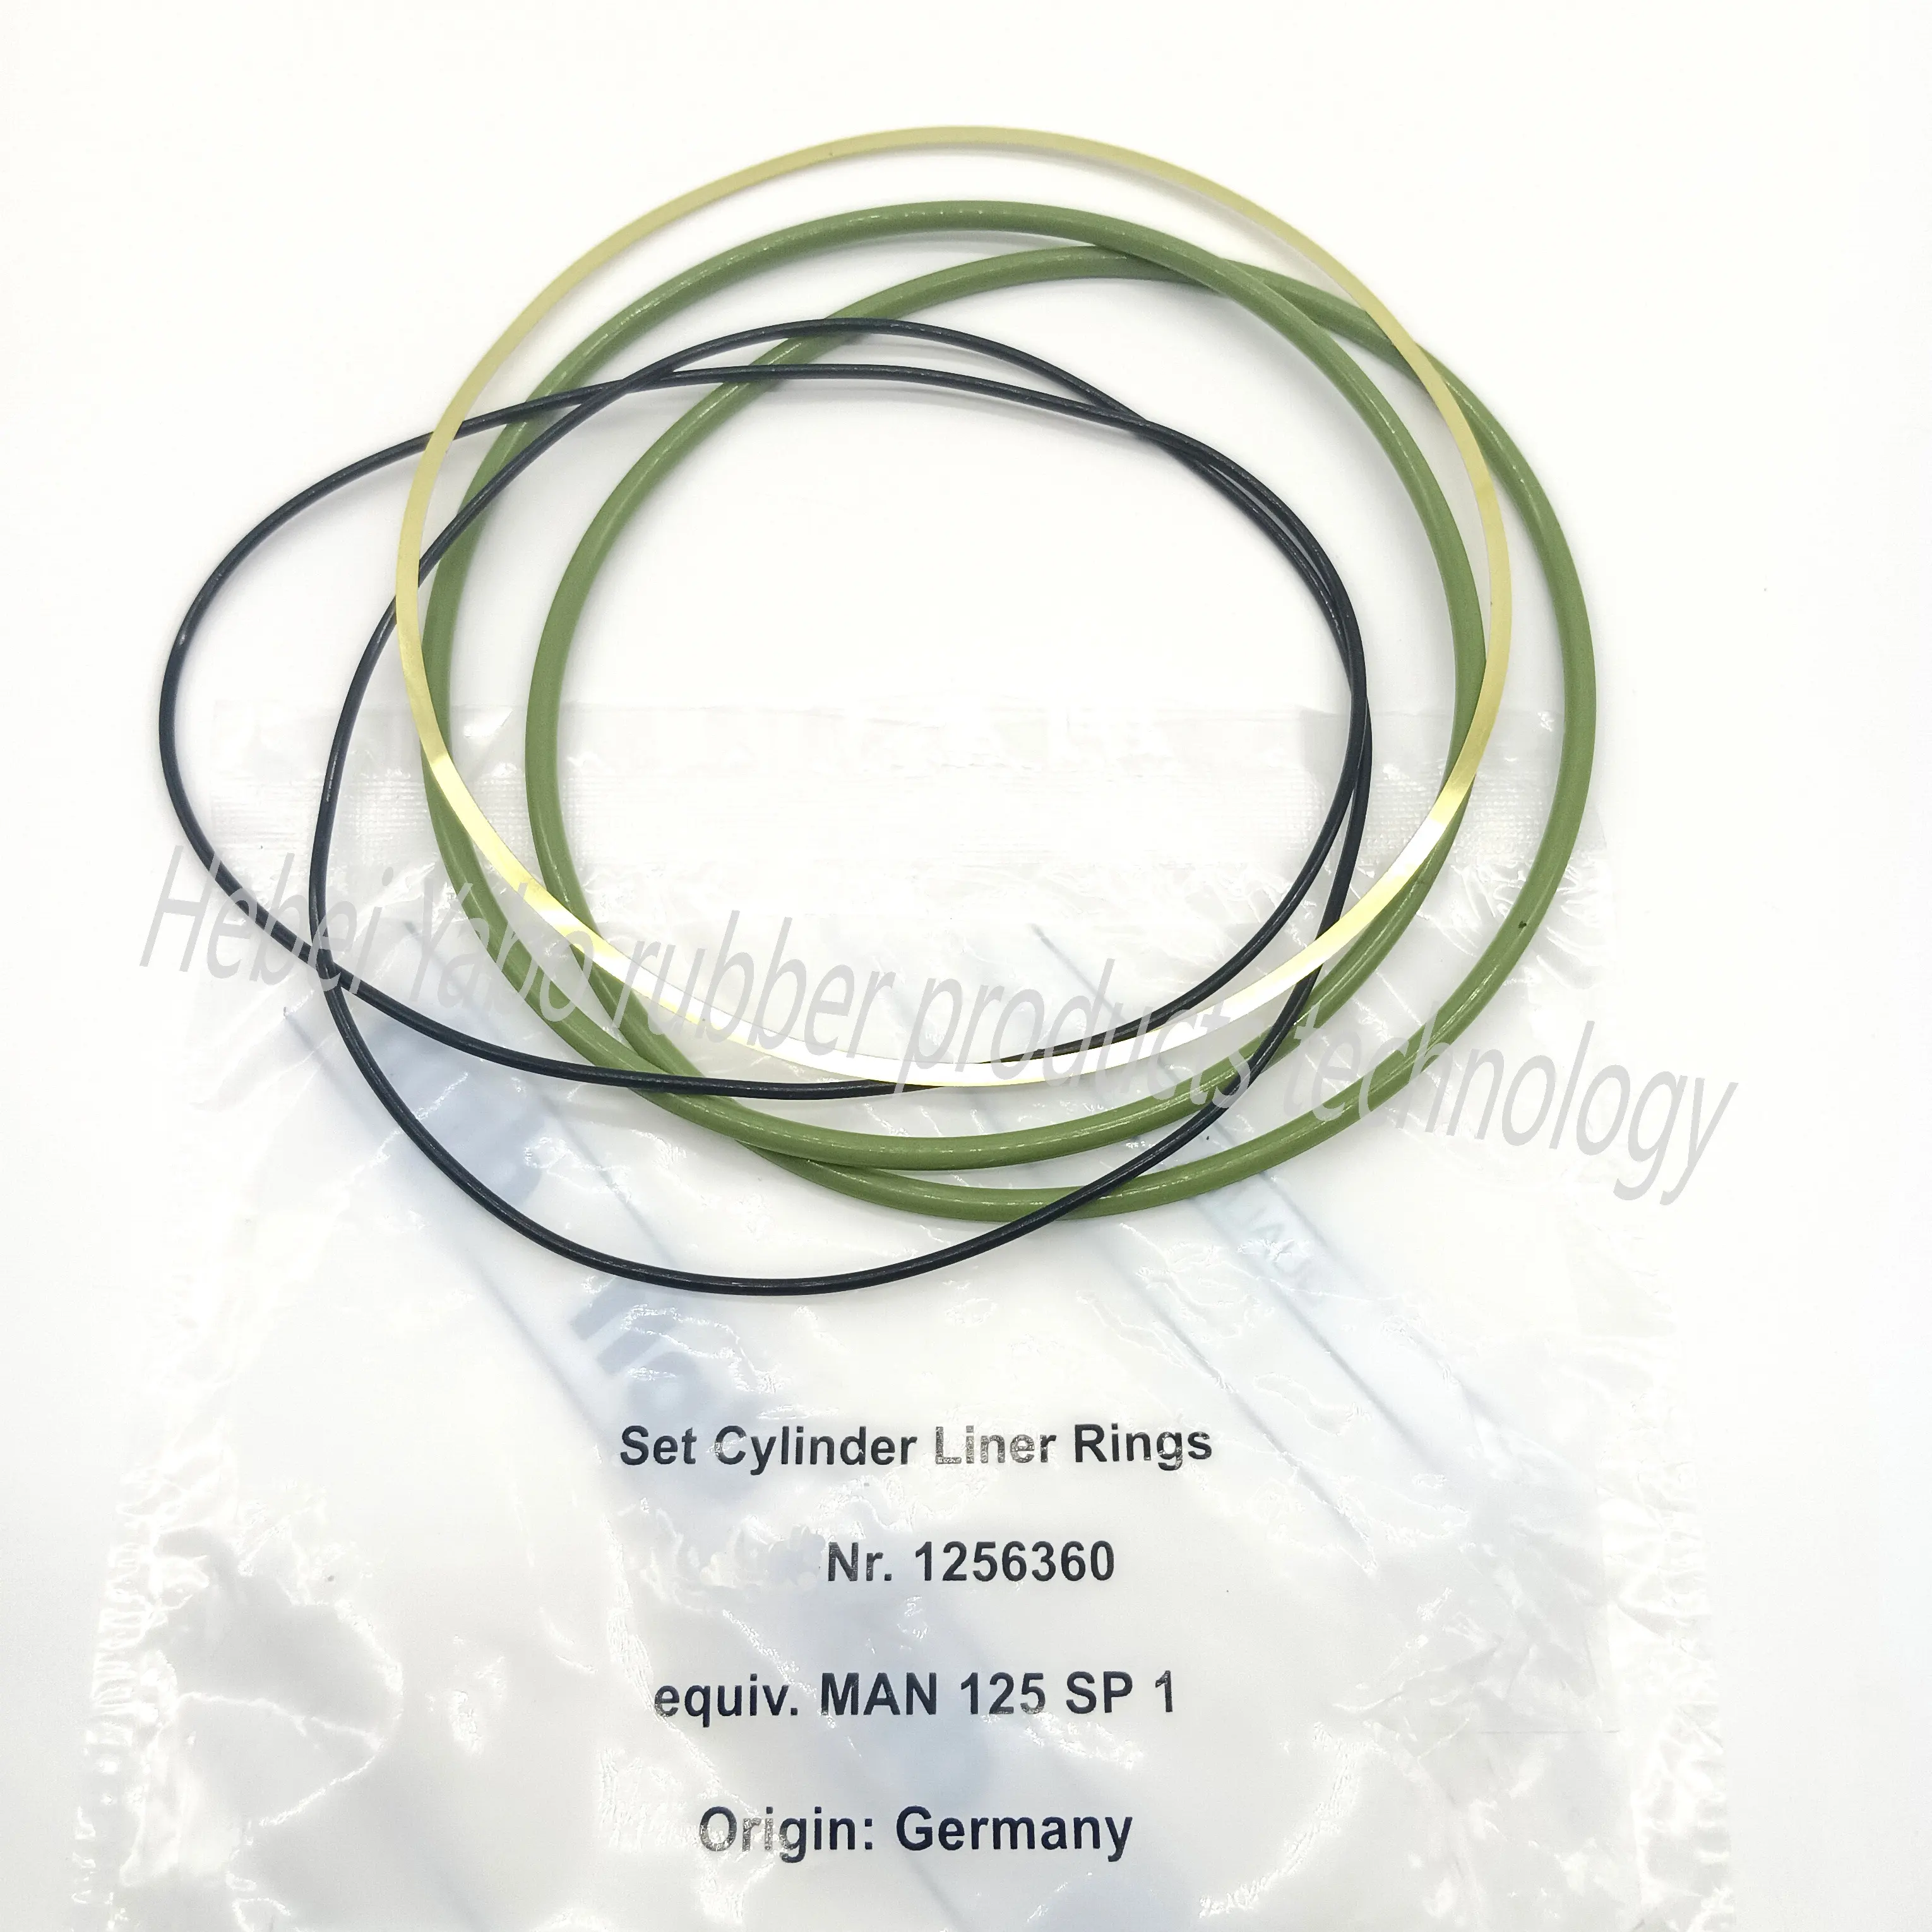 Factory Sale 1256360 MAN 125 SP1 Rubber Ring Truck Seal 5 Pieces Oring Set Cylinder Liner Rings O-rings